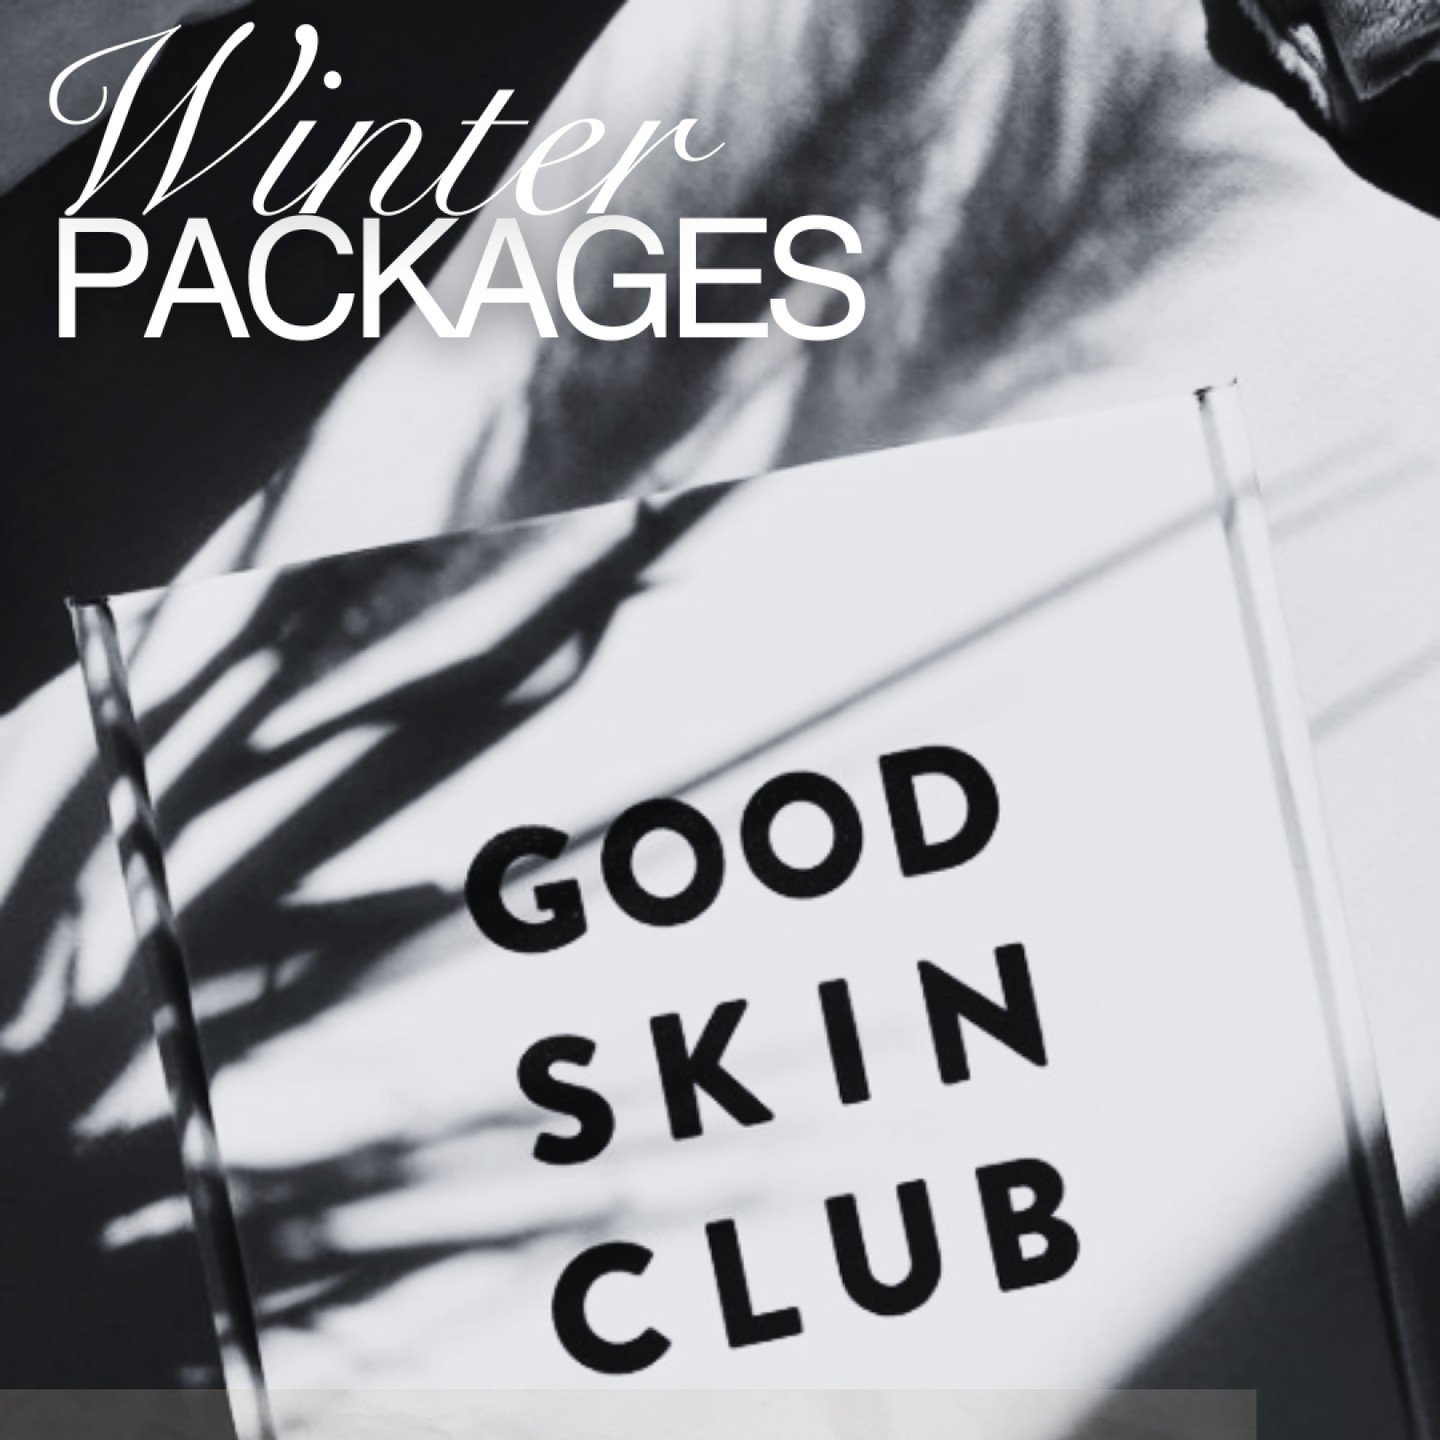 Indulge in our Winter Packages, curated to revive your skin:

1. **Lift &amp; Refine Package**: 4 x Emface treatments + 3 x CoolPeel treatments
 - RRP $4800, now only $3200

2. **Clear &amp; Glow Package**: 3 x IPL photofacials + 3 x Vita Brite treat